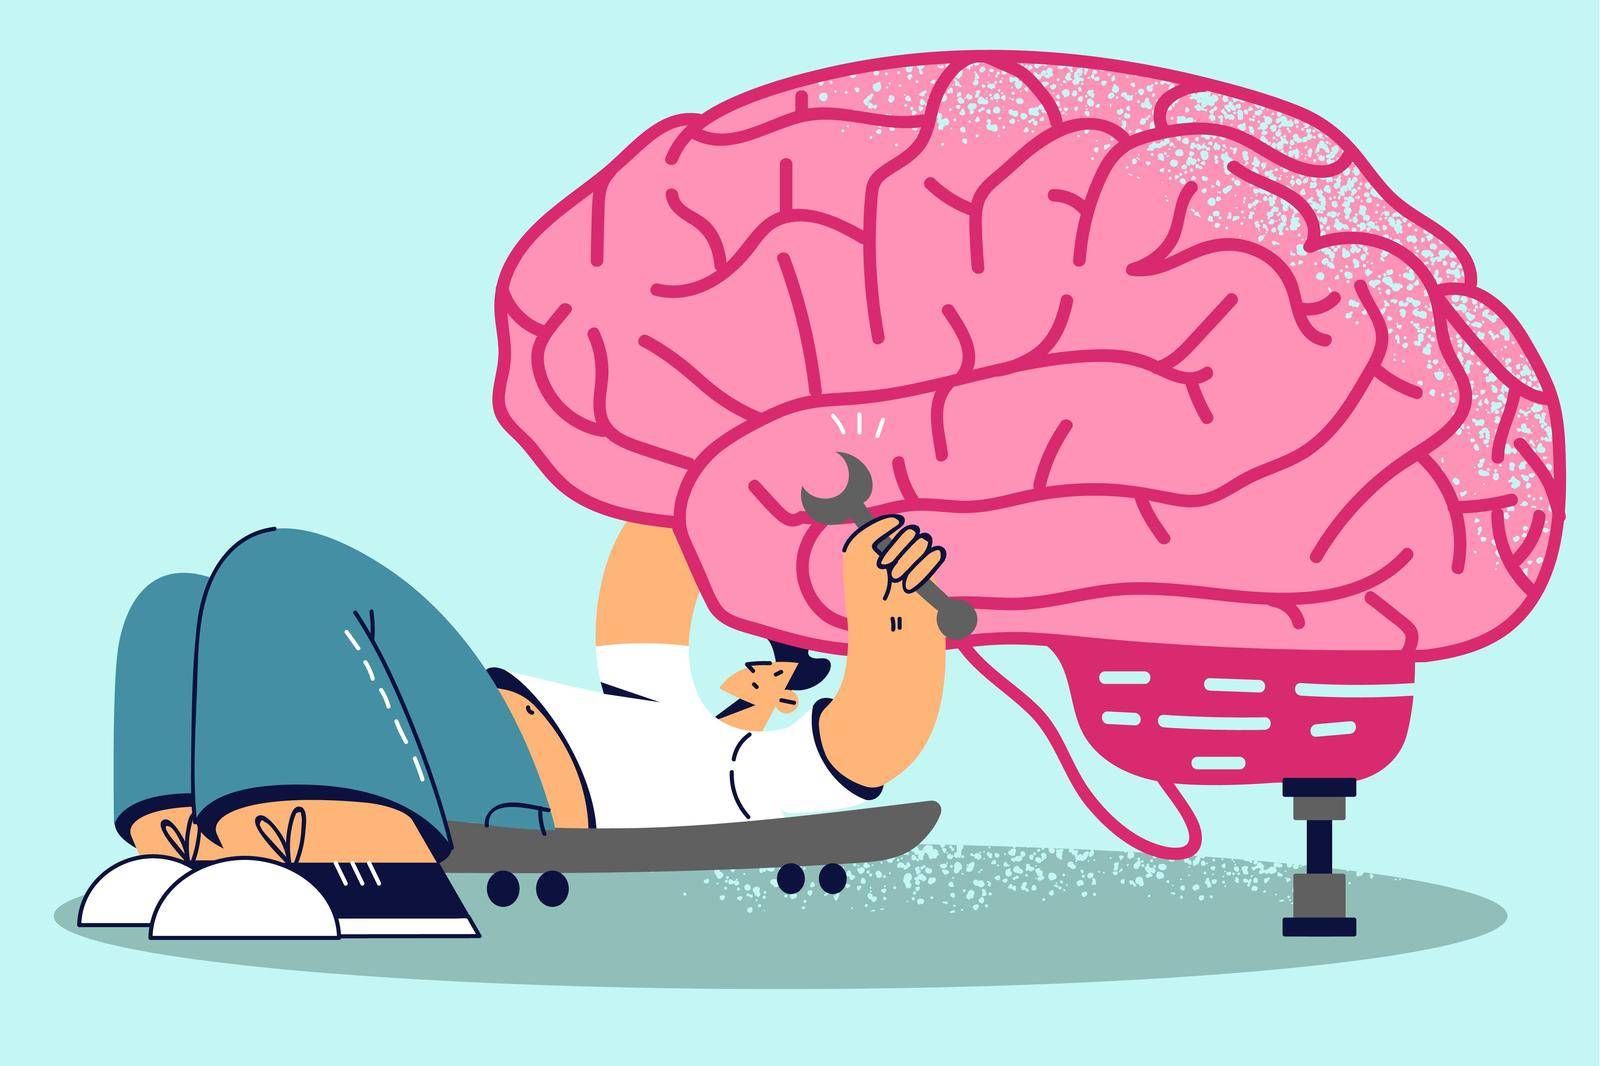 Man mechanic fixing brain with instruments. Concept of male psychologist repair patient mind, give help. Mental problems solving and recovery. Vector illustration.